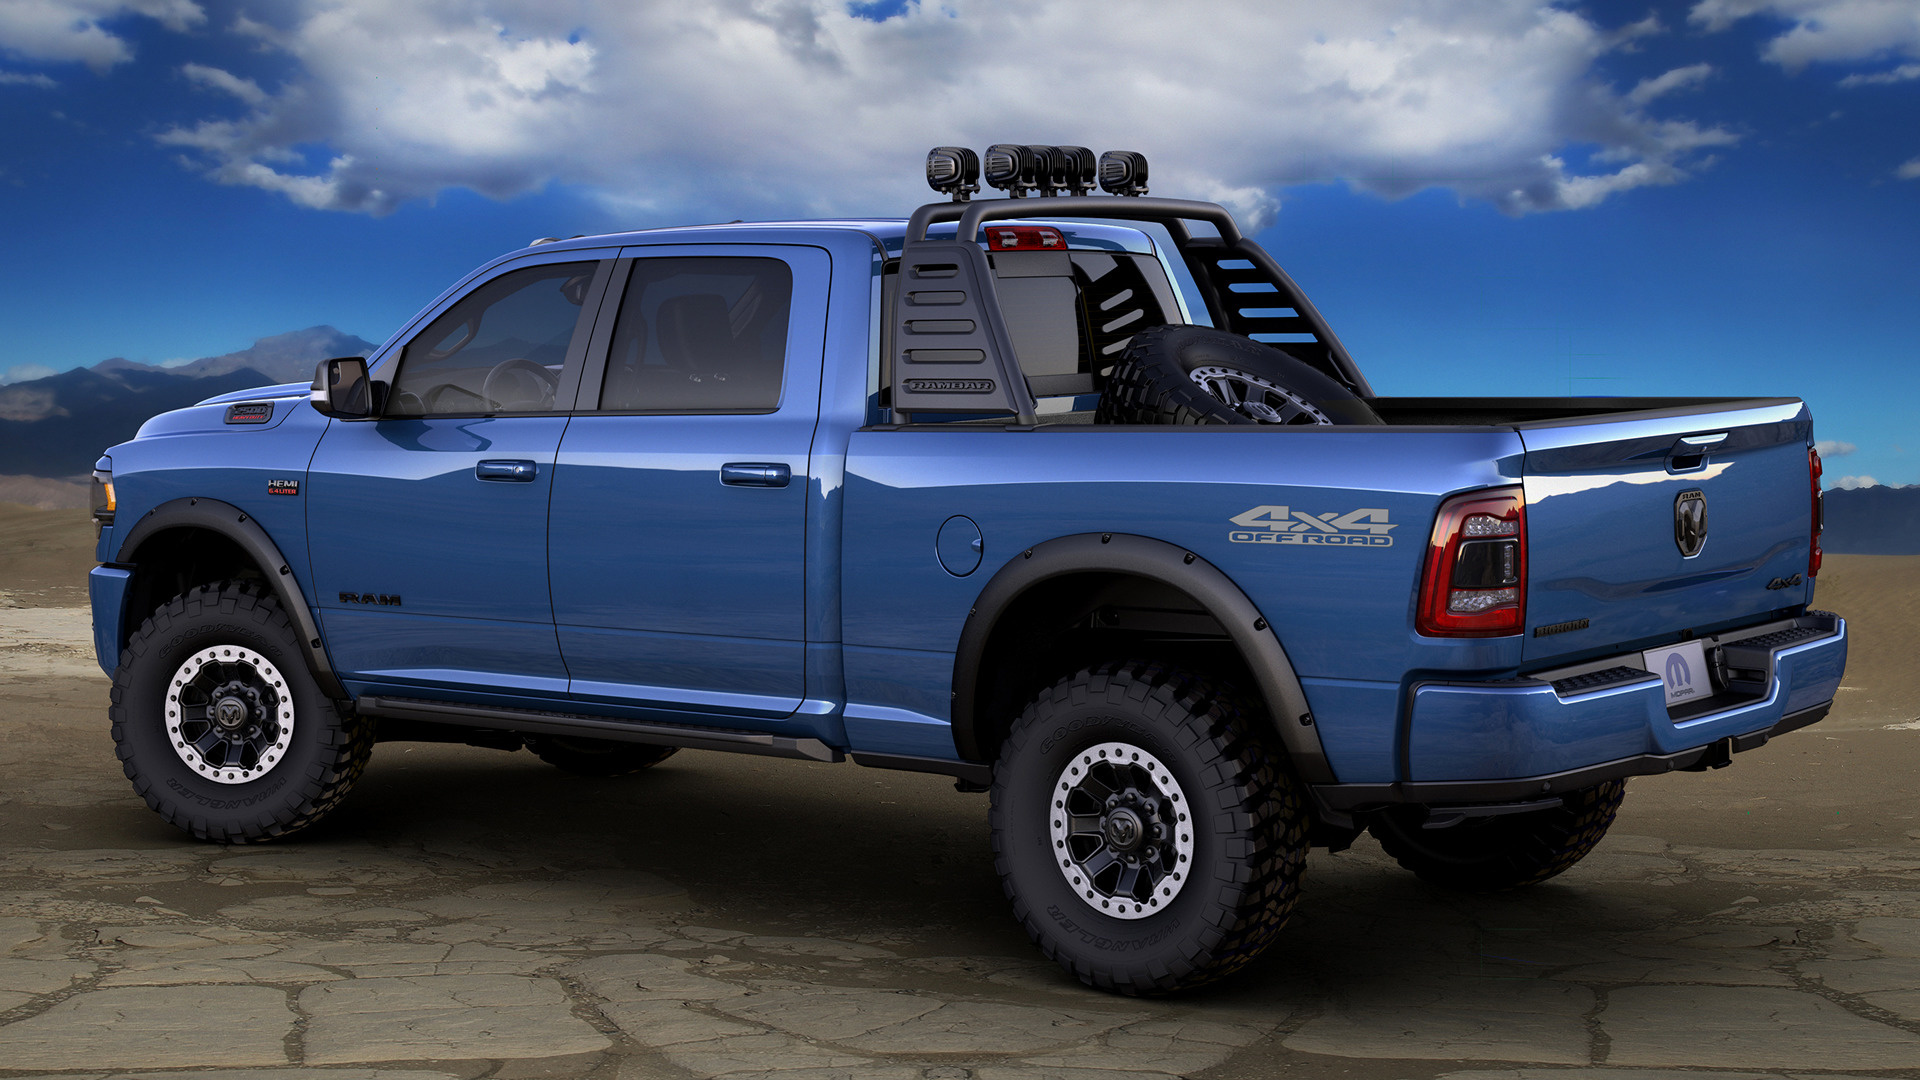 2019 Ram 2500 HD Big Horn Crew Cab by Mopar - Wallpapers and HD Images